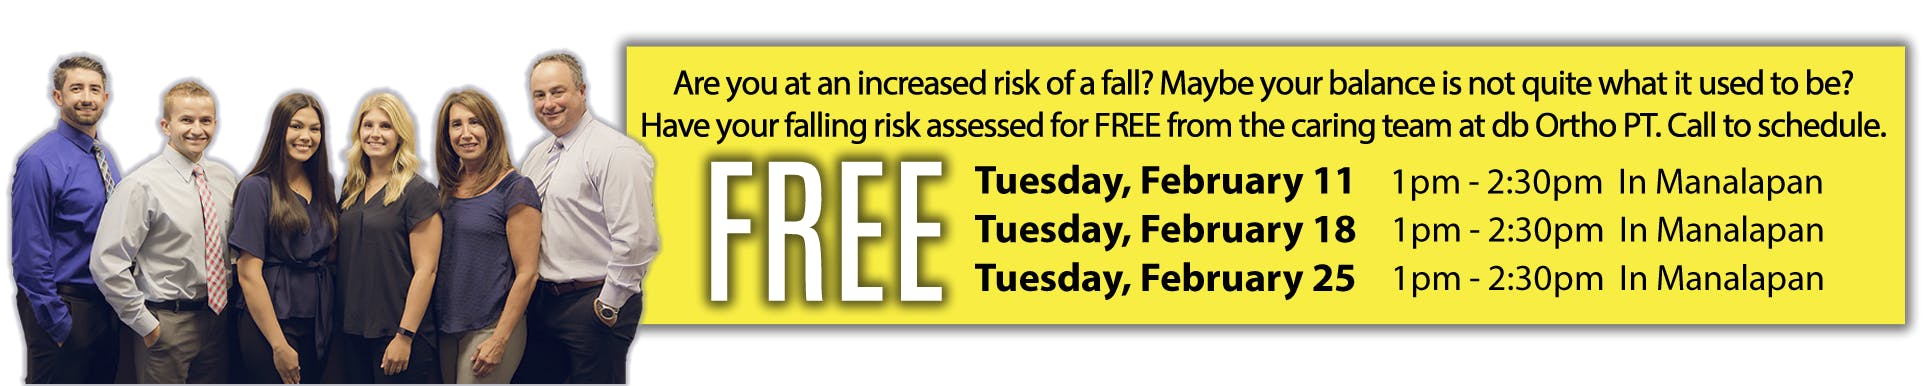 Are you at an increased risk of fall? Maybe your balance is not quite what it used to be? Have you falling risk assed for FREE from the caring team at dbOrtho PT. Call to schedule. | Tuesday, February 11th 1pm-2:30pm in Manalapan | Tuesday, February 18th 1pm-2:30pm in Manalapan | Tuesday, February 25th 1pm-2:30pm in Manalapan